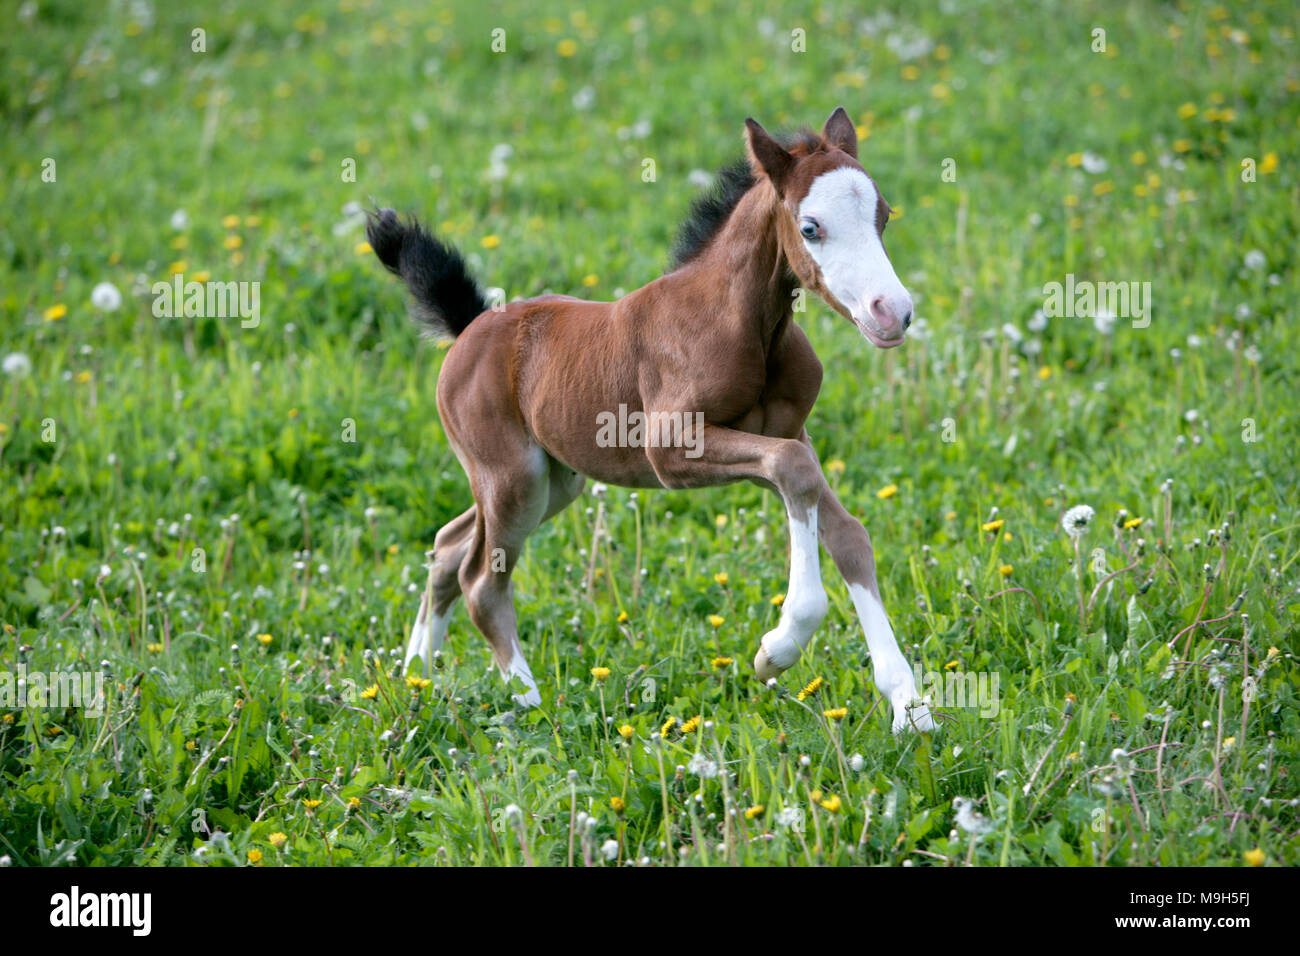 Cute week old Welsh Pony Foal galloping on spring meadow with fresh grass and yellow flowers. Stock Photo